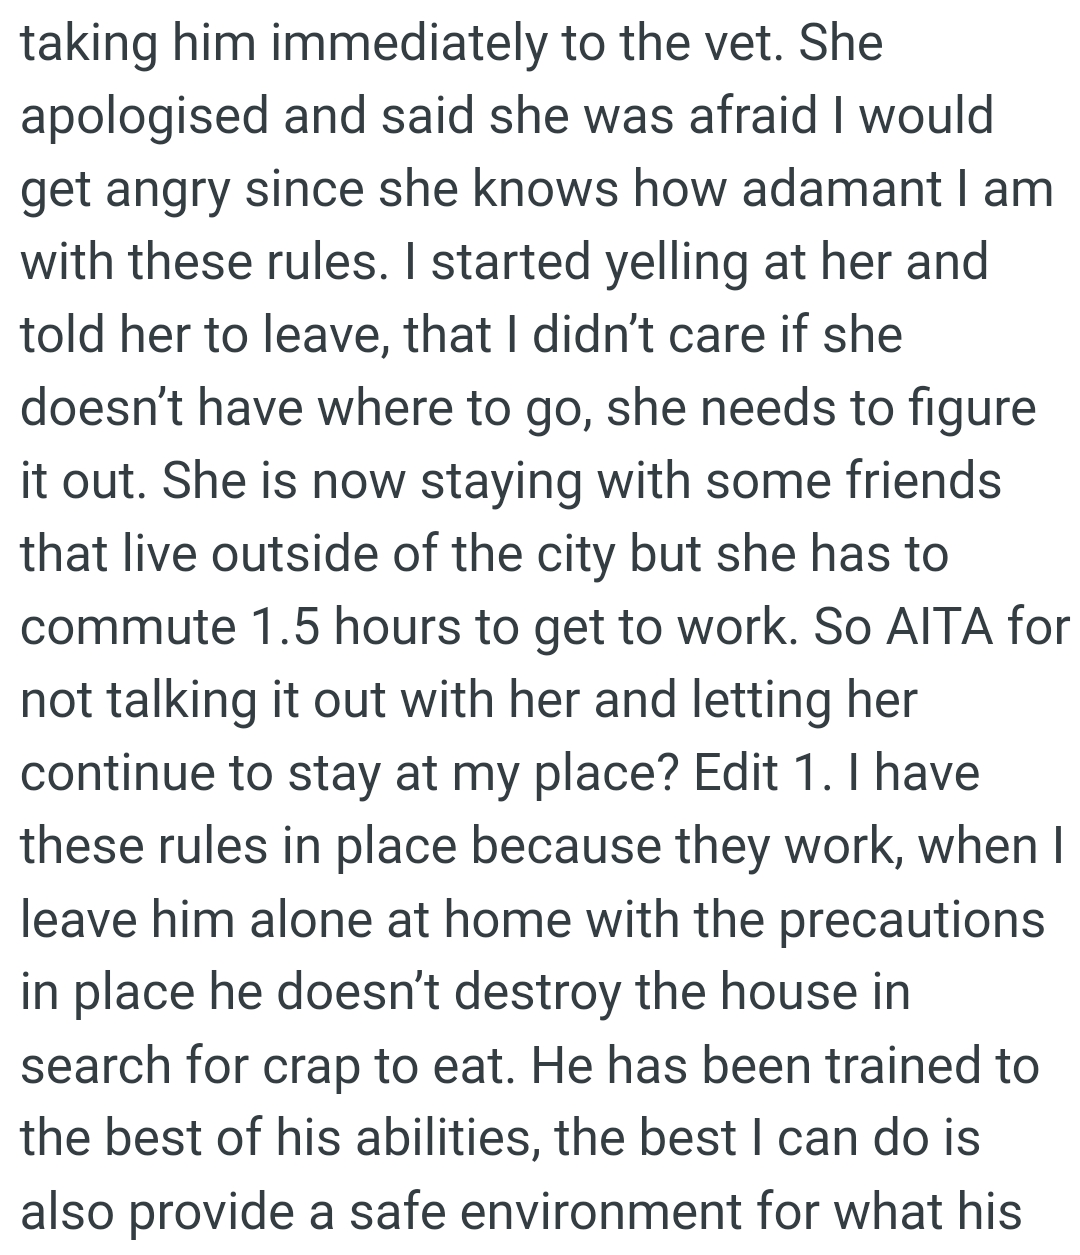 OP's best friend is now staying with some friends who live outside of the city